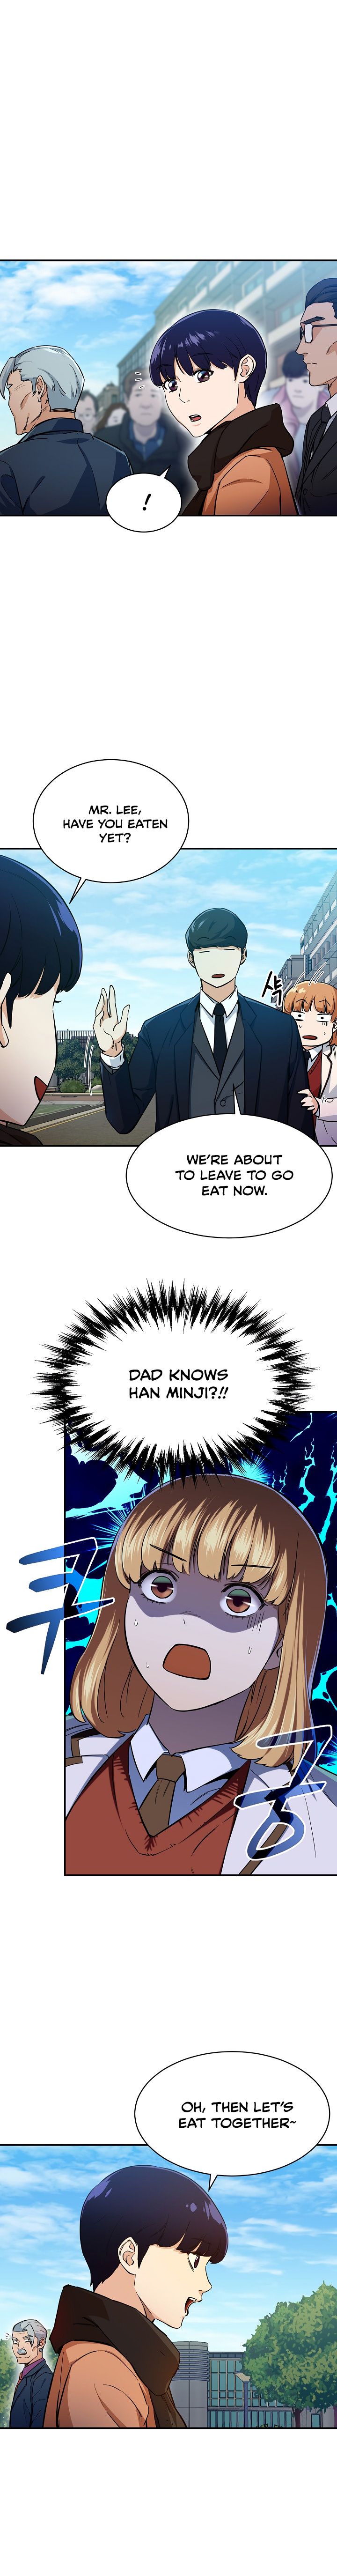 My Dad Is Too Strong chapter 28